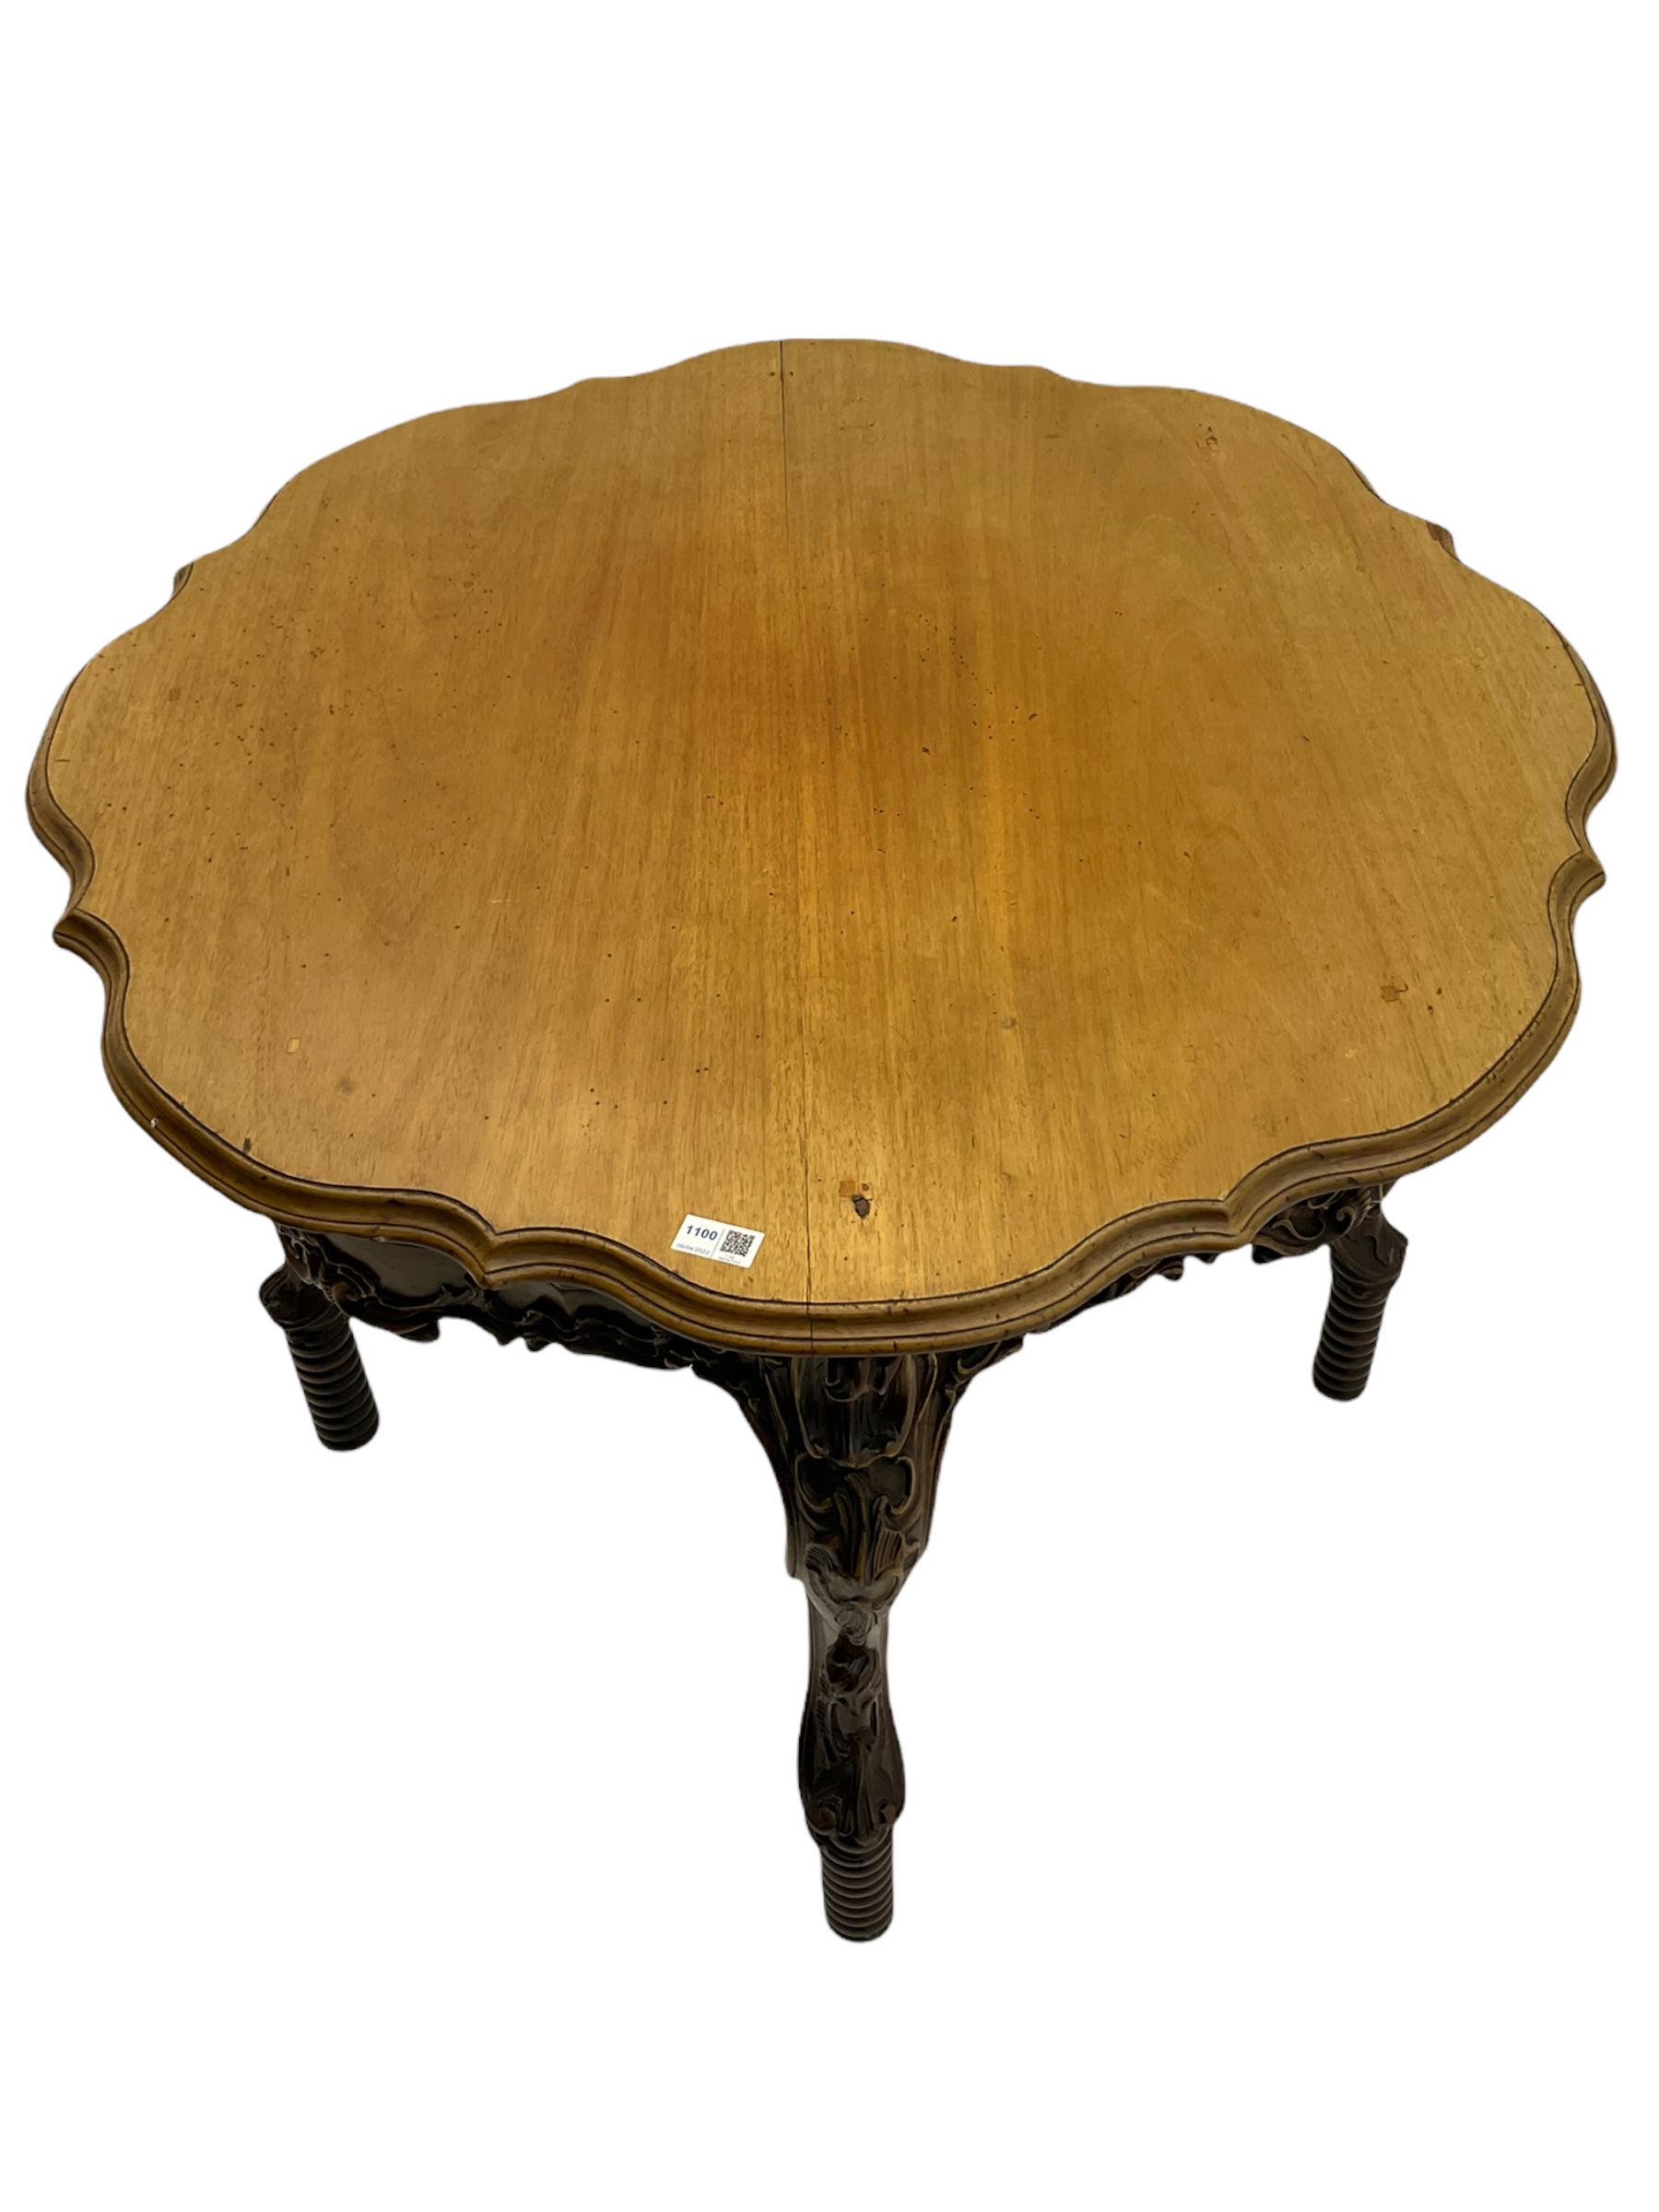 19th century walnut centre table - Image 8 of 9